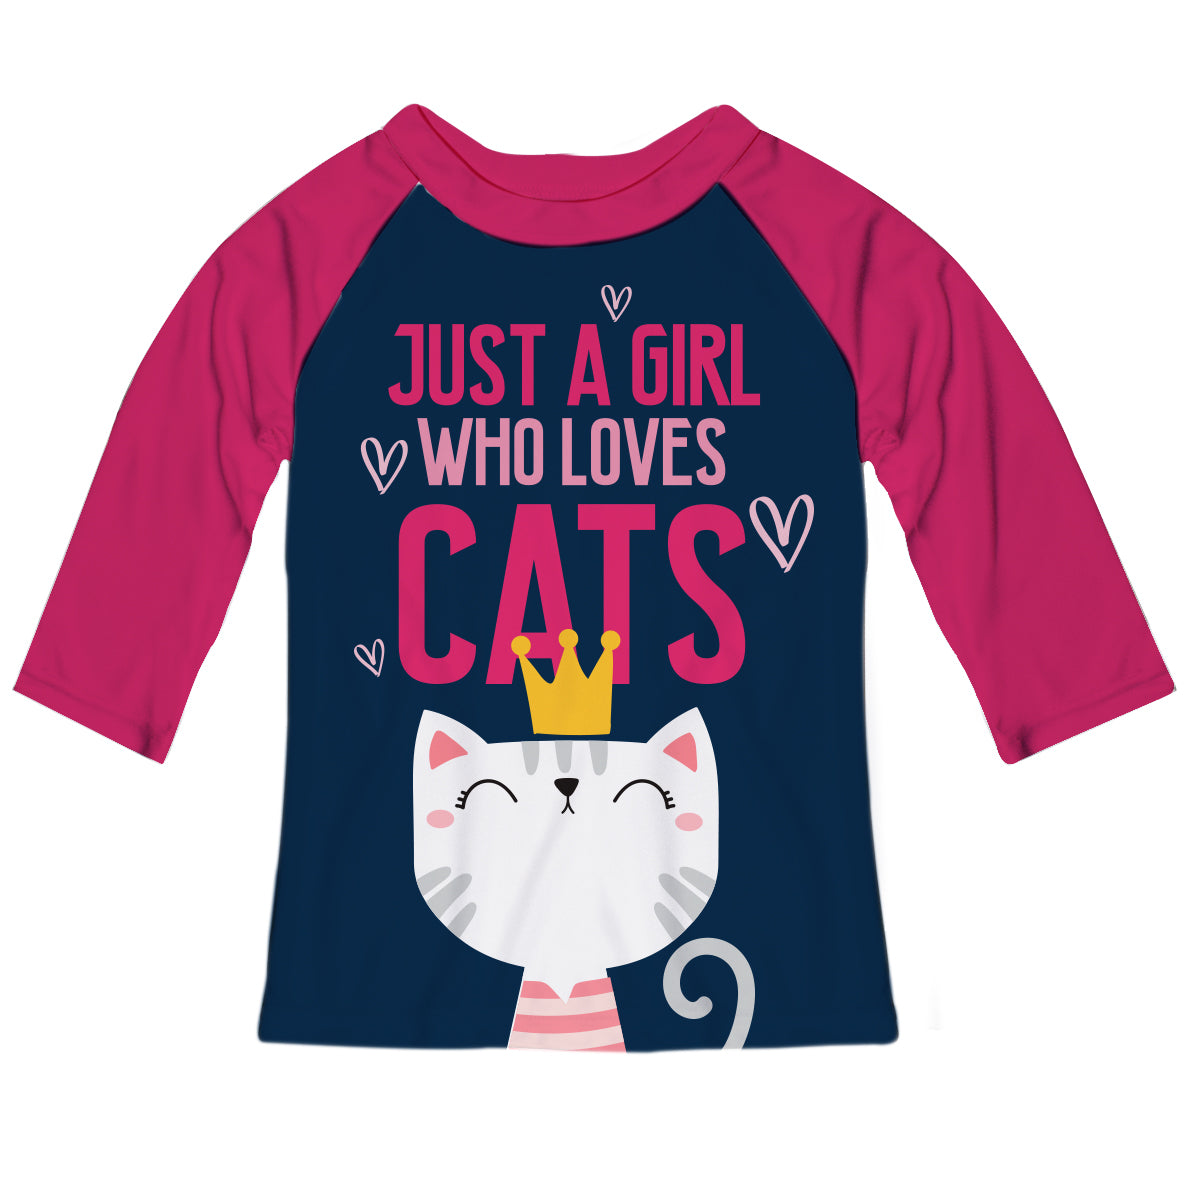 Just A Girl Who Loves Cats Navy and Hot Pink Tee Shirt 3/4 Sleeve - Wimziy&Co.